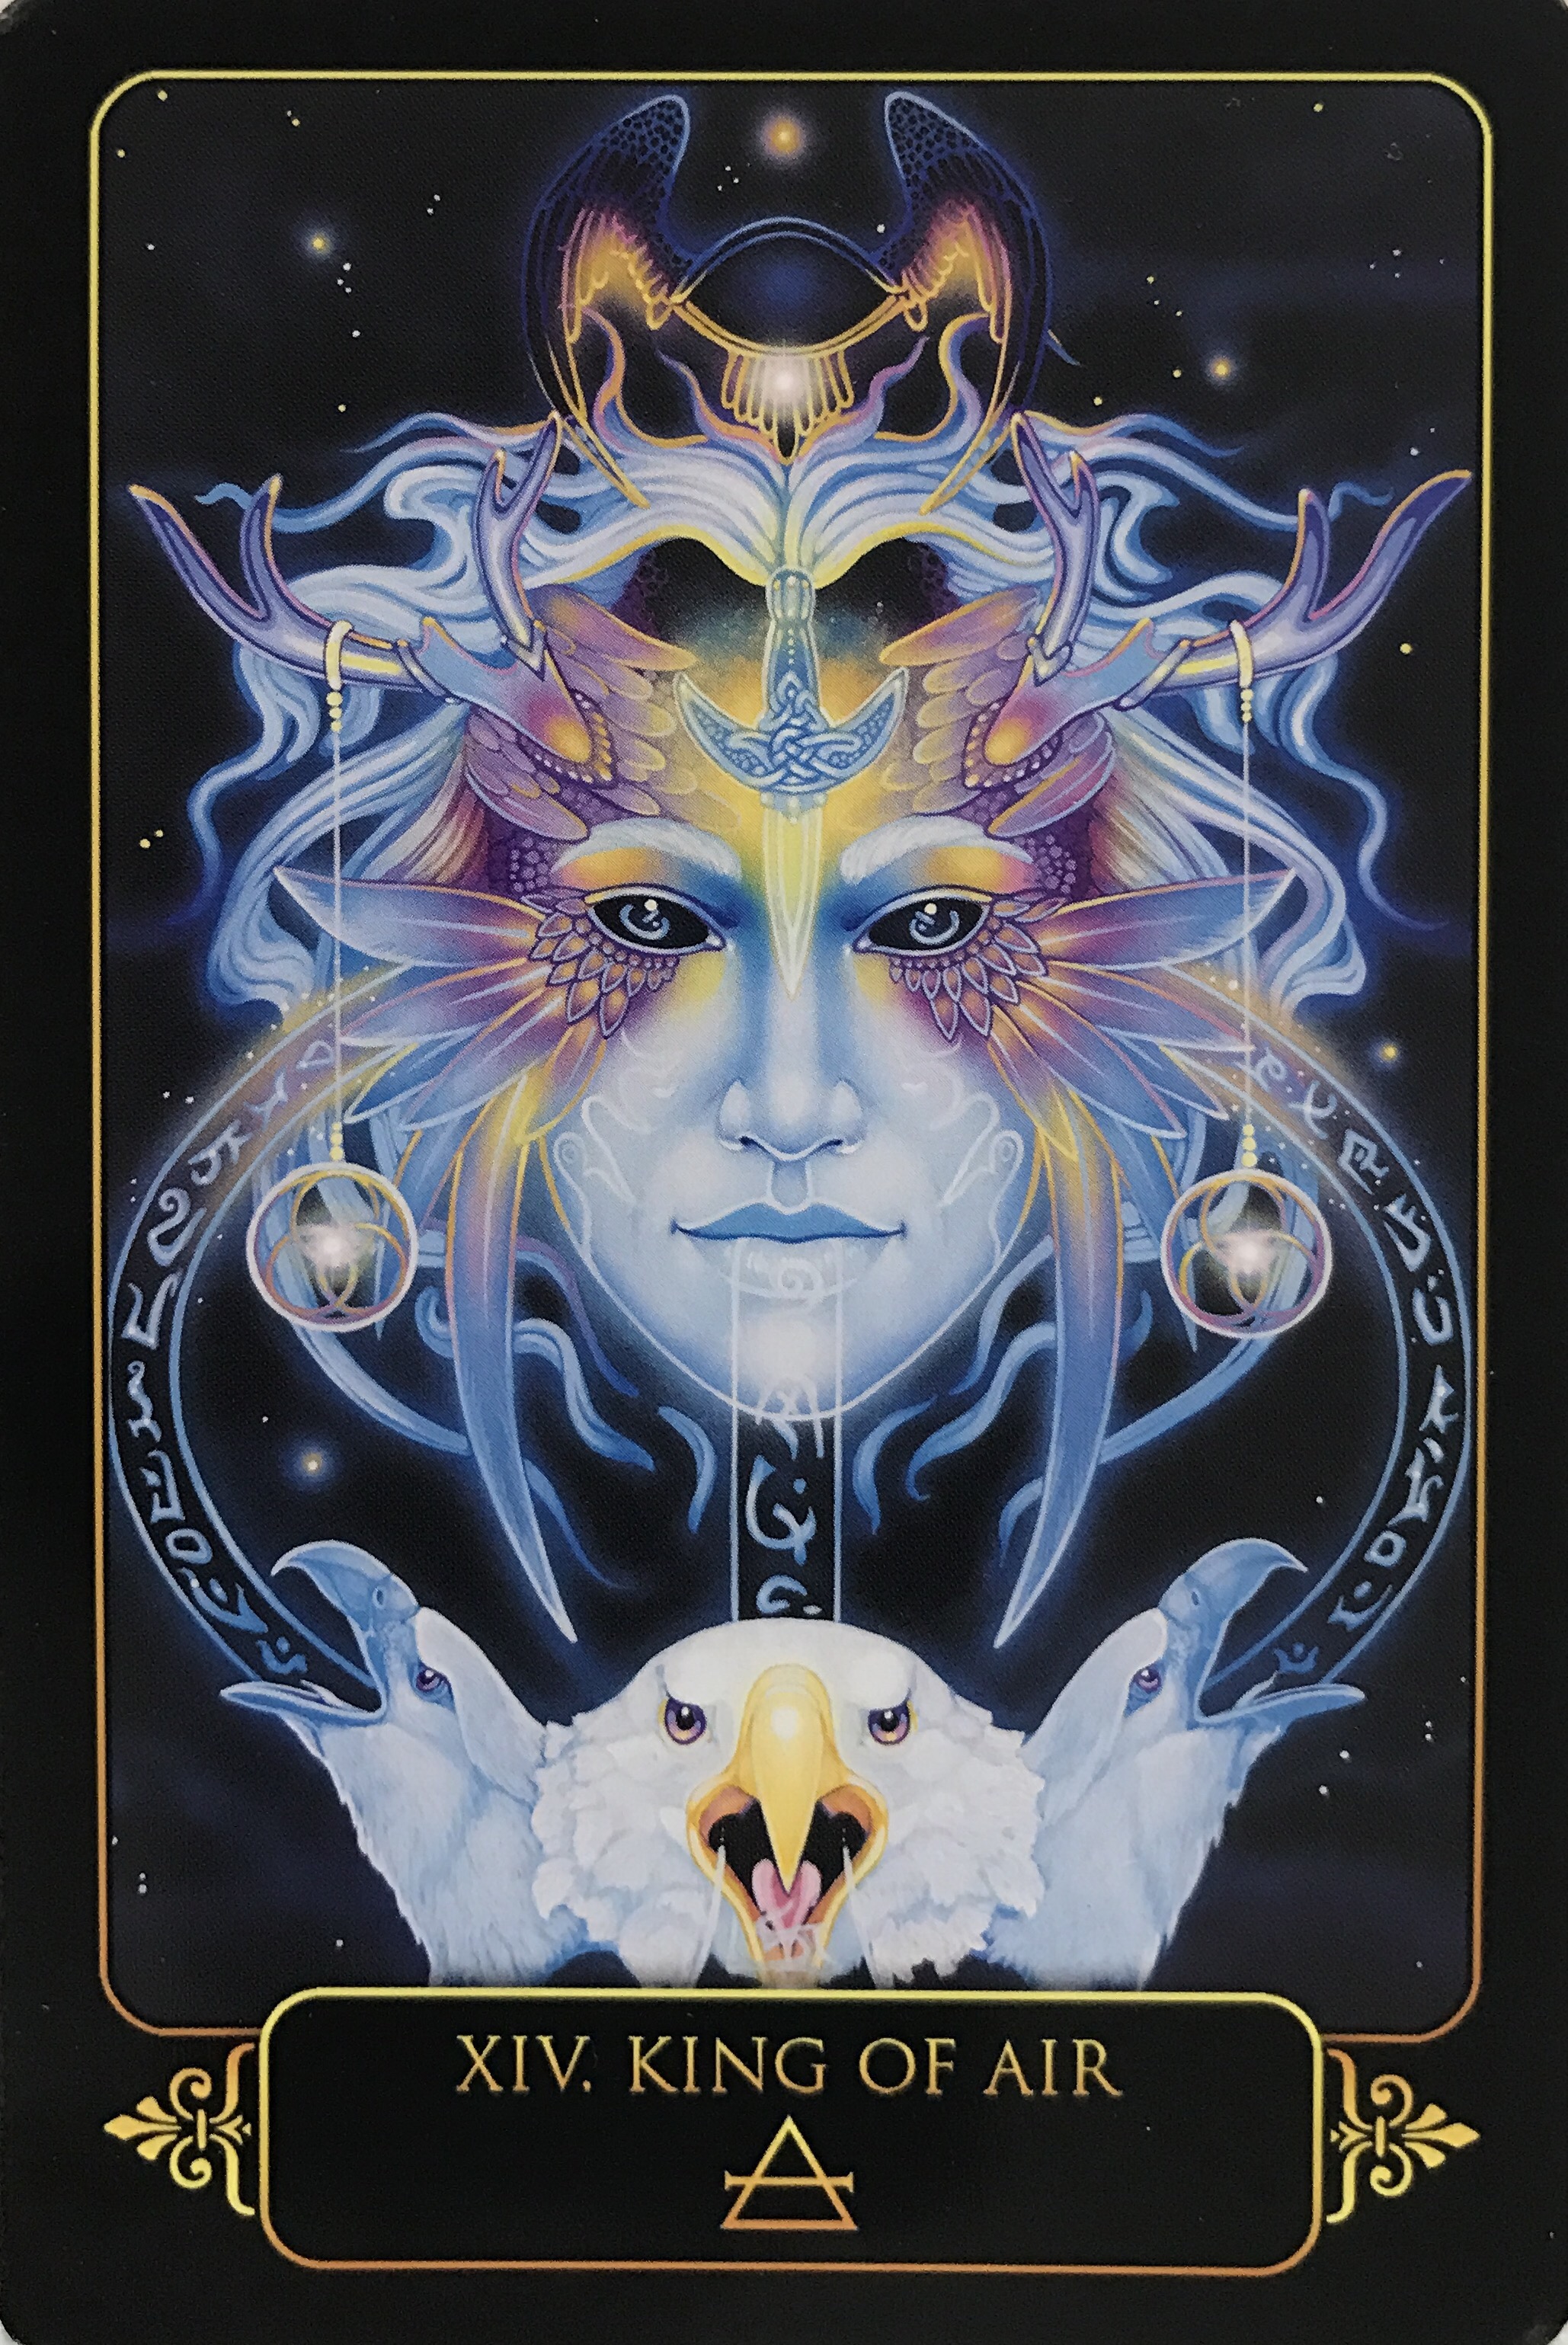 What Is The Dreams Of Gaia Tarot?